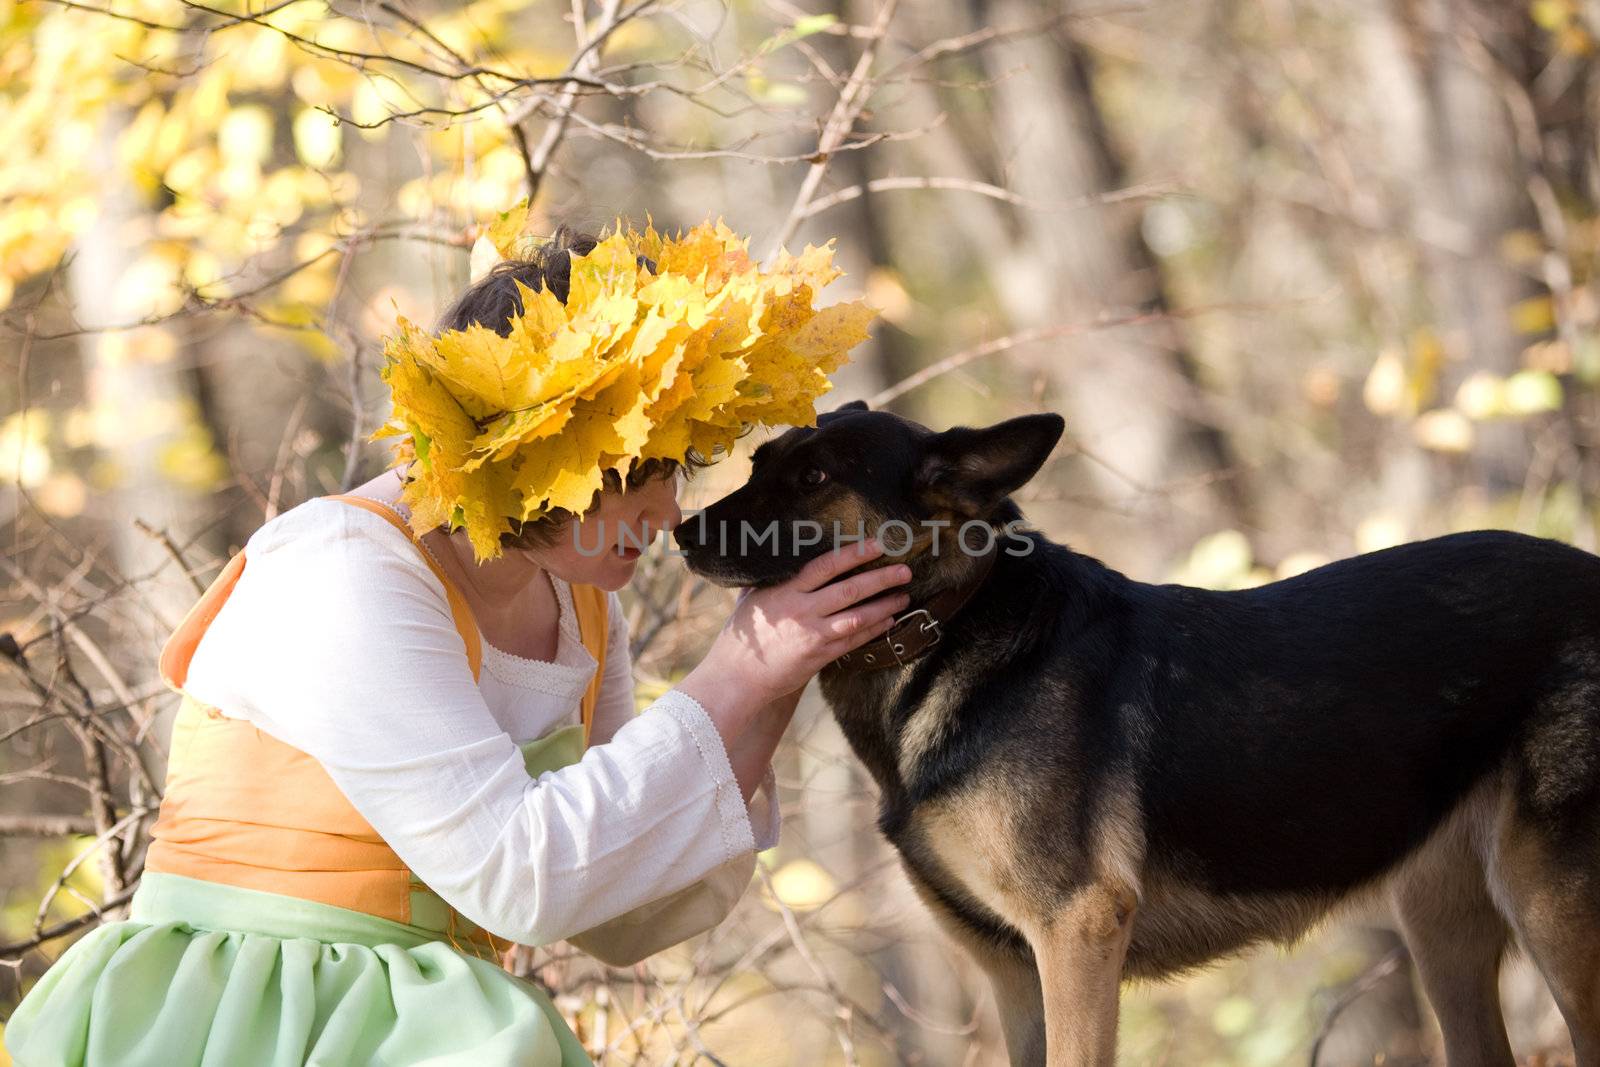 Woman and dog by foaloce